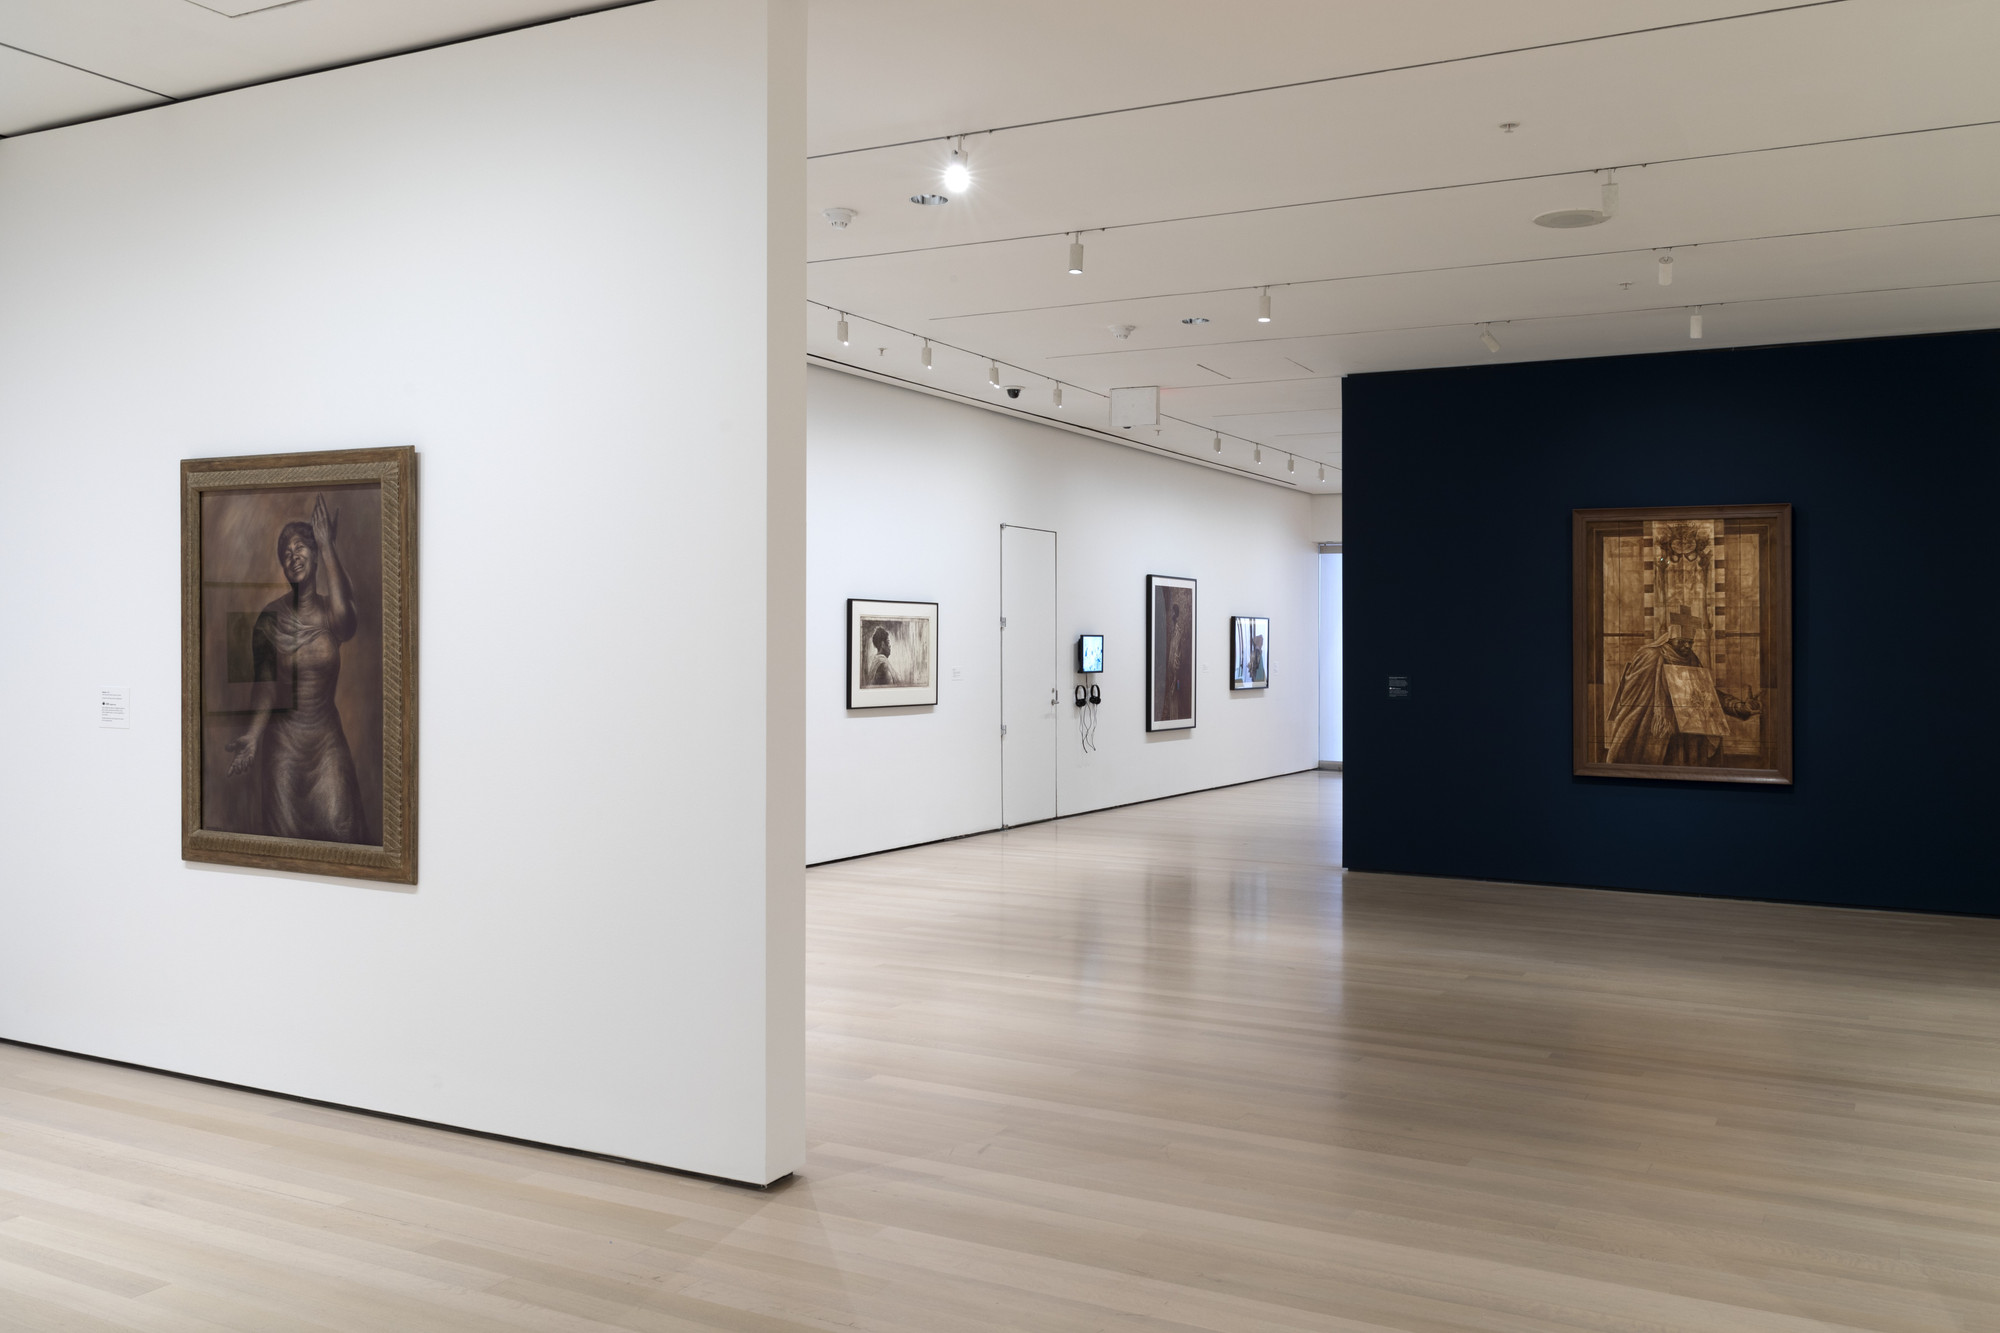 Installation view of the exhibition, "Charles White: A Retrospective" |